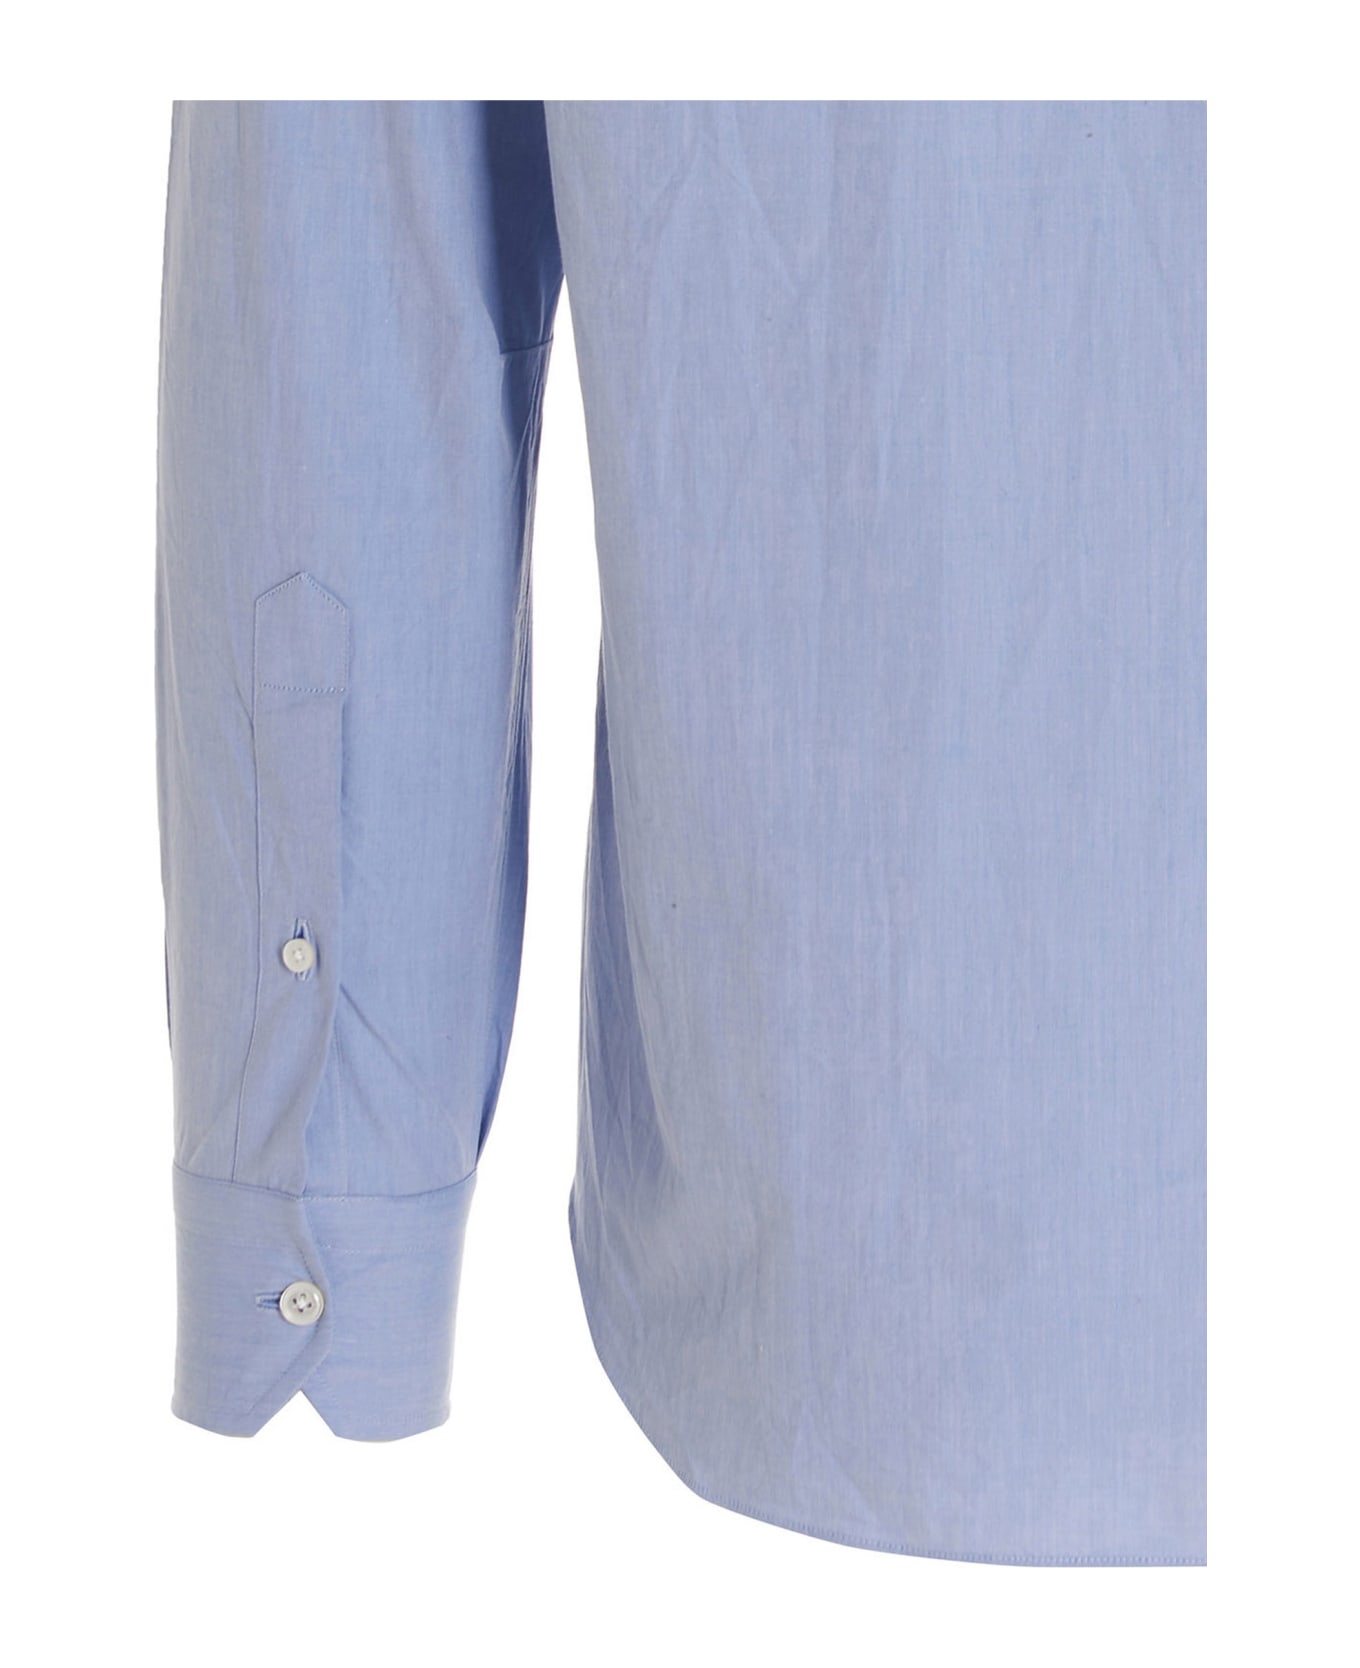 Salvatore Piccolo Rounded Collar Shirt - Light Blue